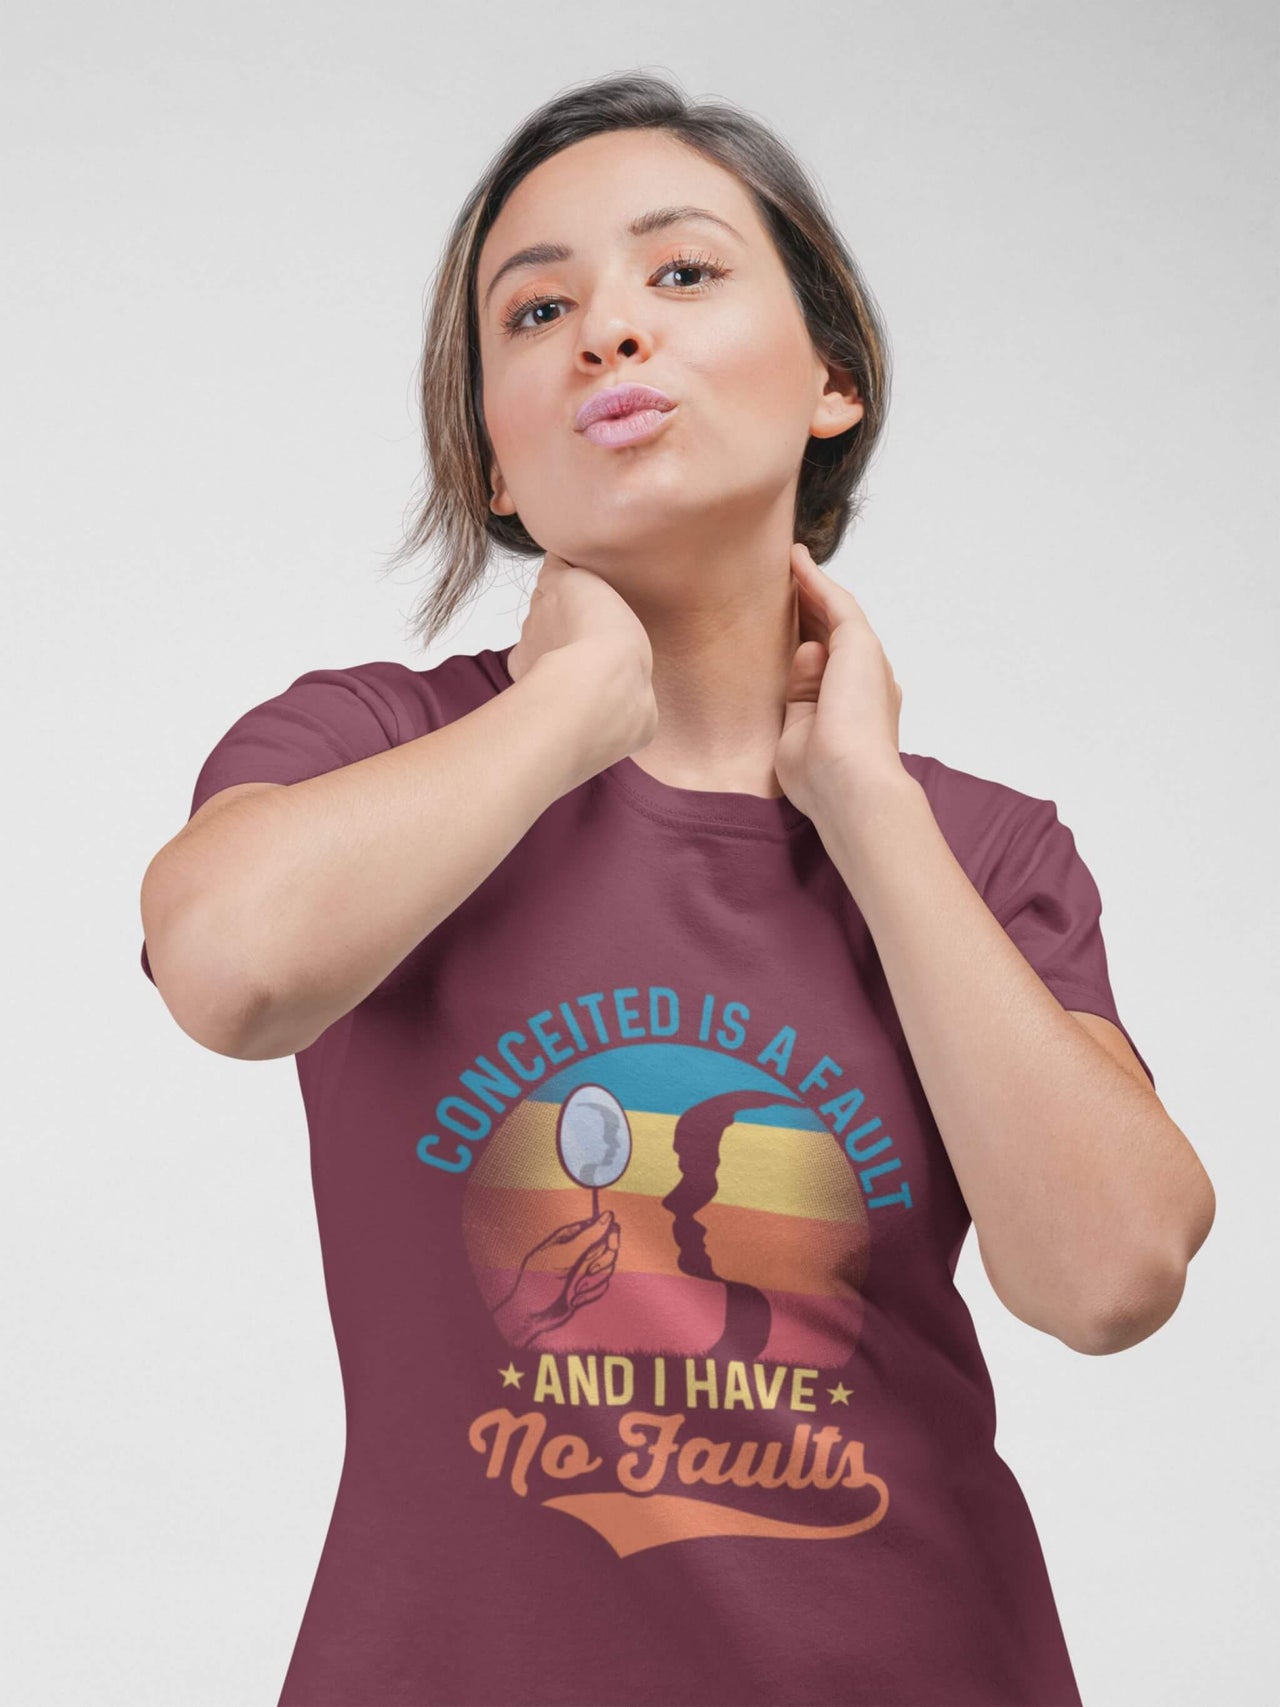 Conceited Is A Fault And I Have No Faults - Unisex Heavy Cotton T Shirt | Abanak